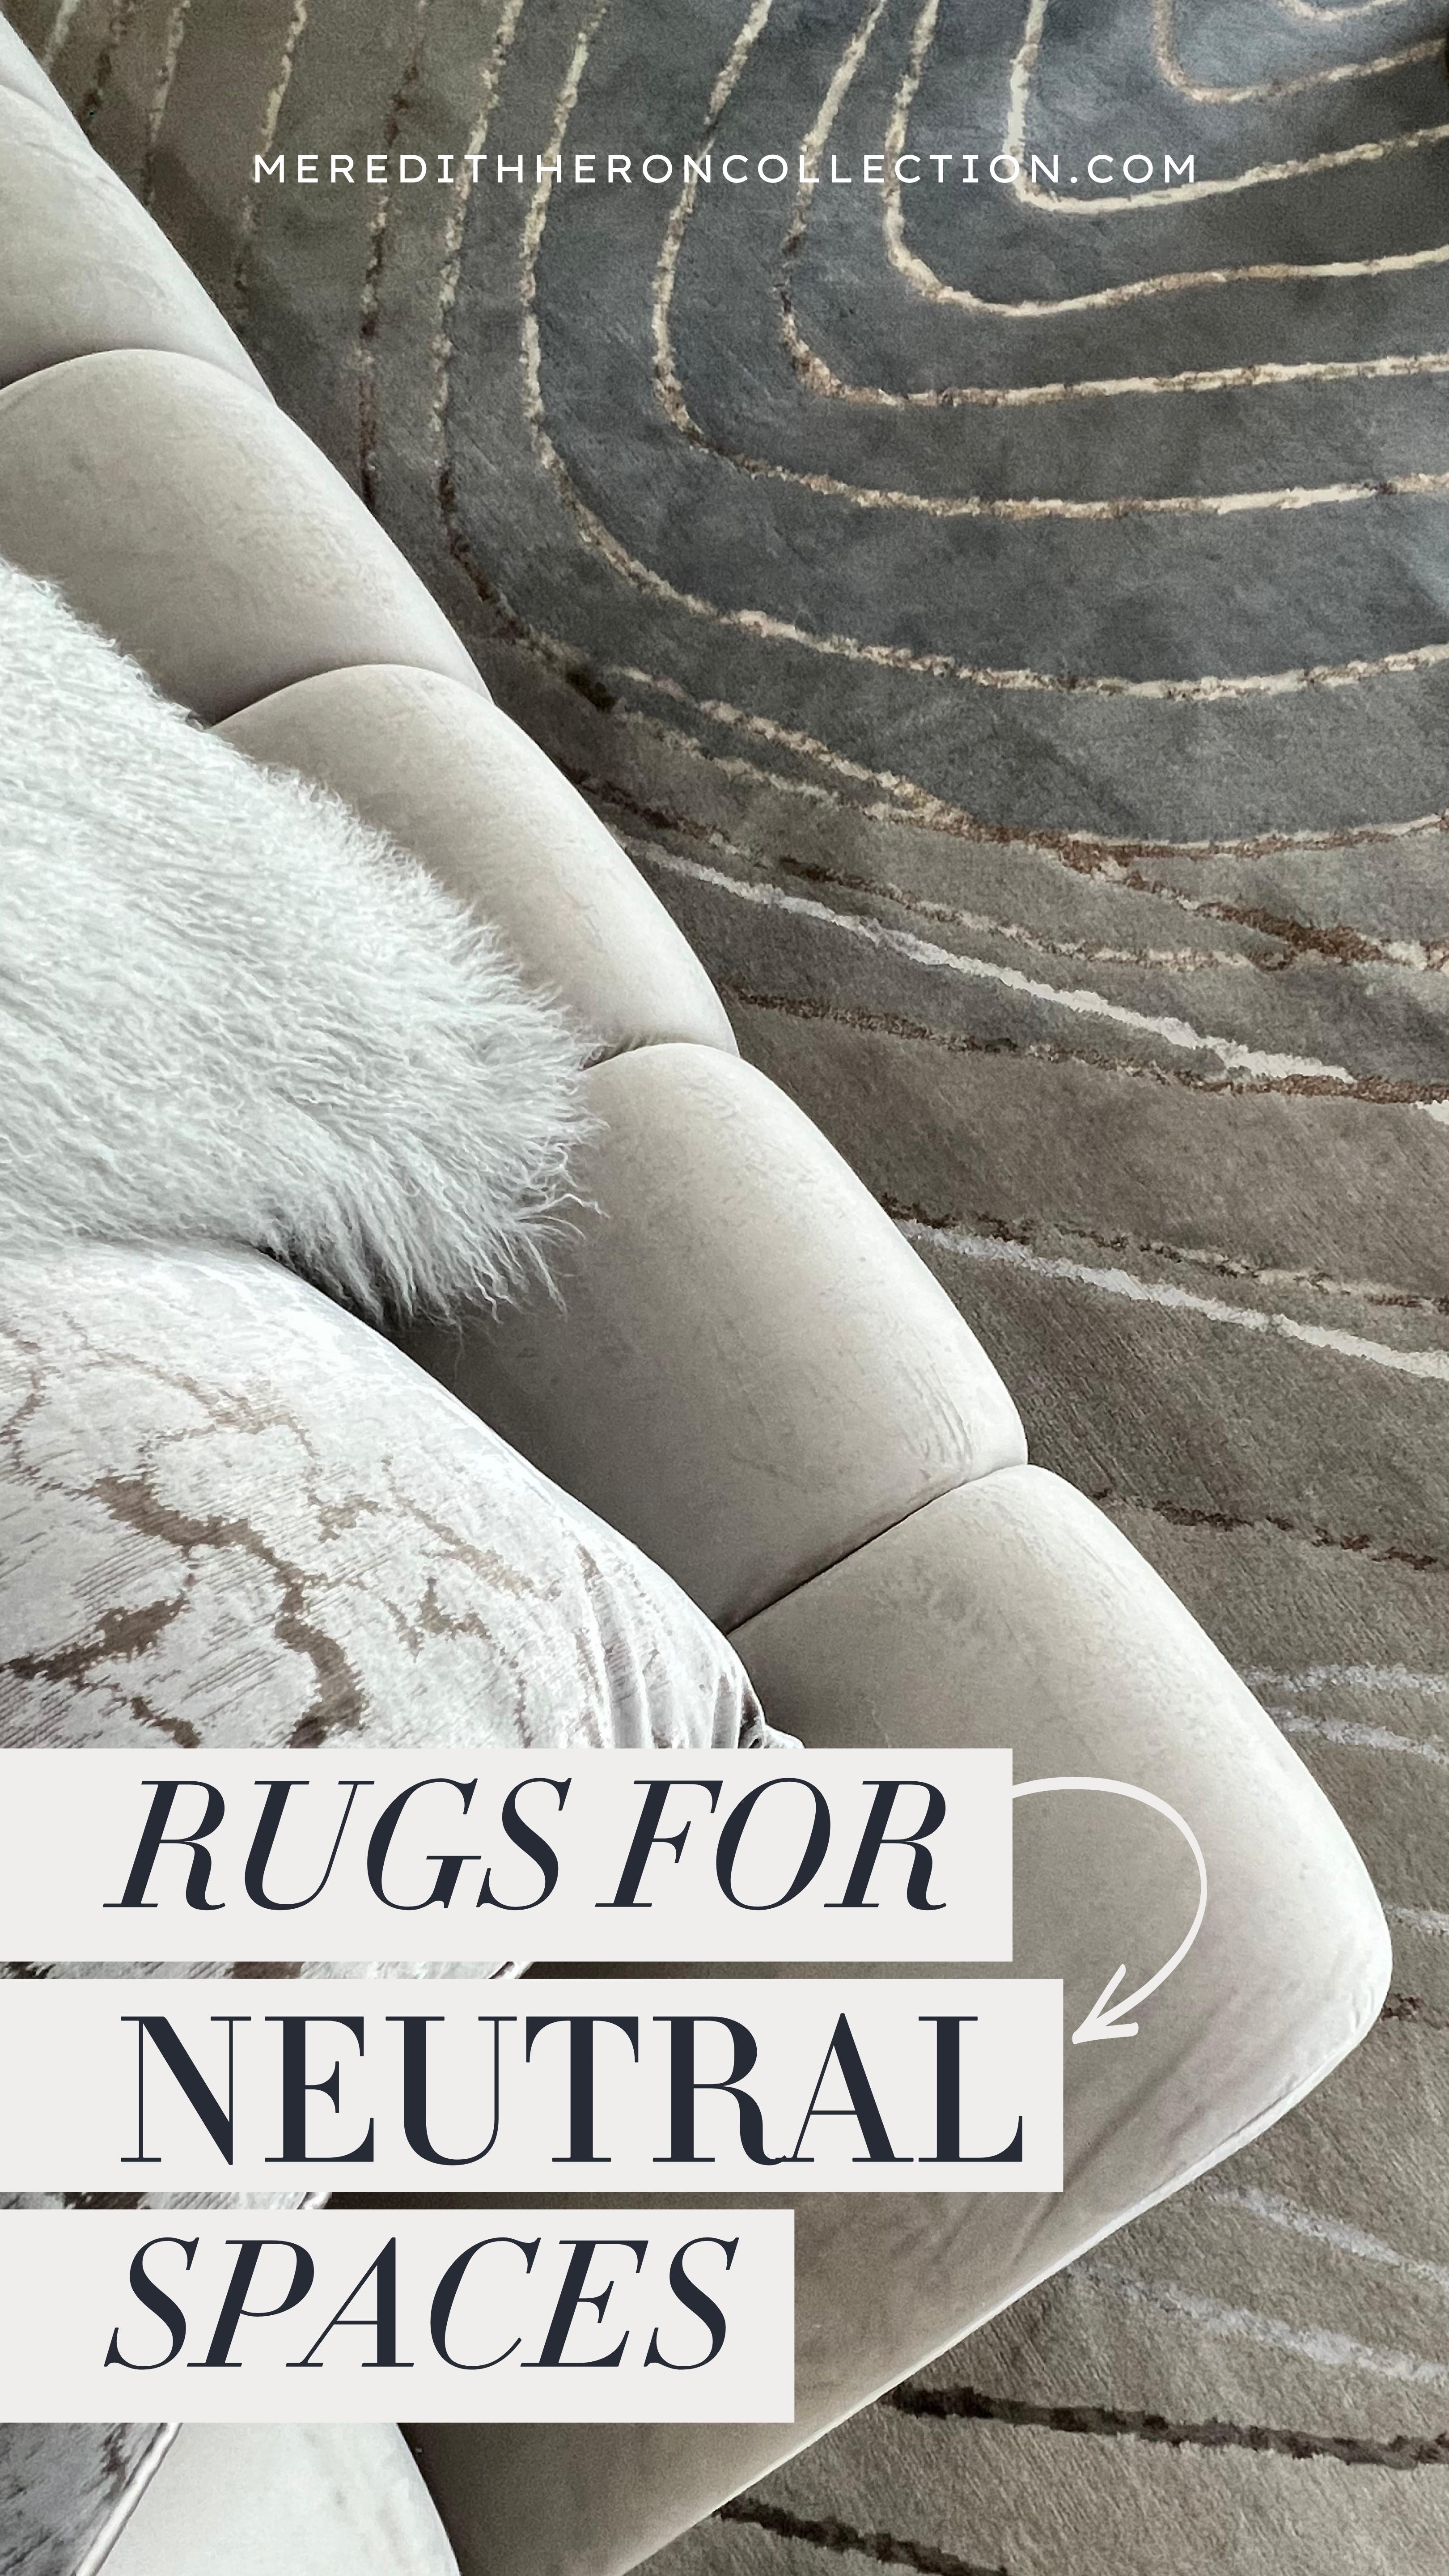 Rugs for Neutral Spaces by Meredith Heron Collection